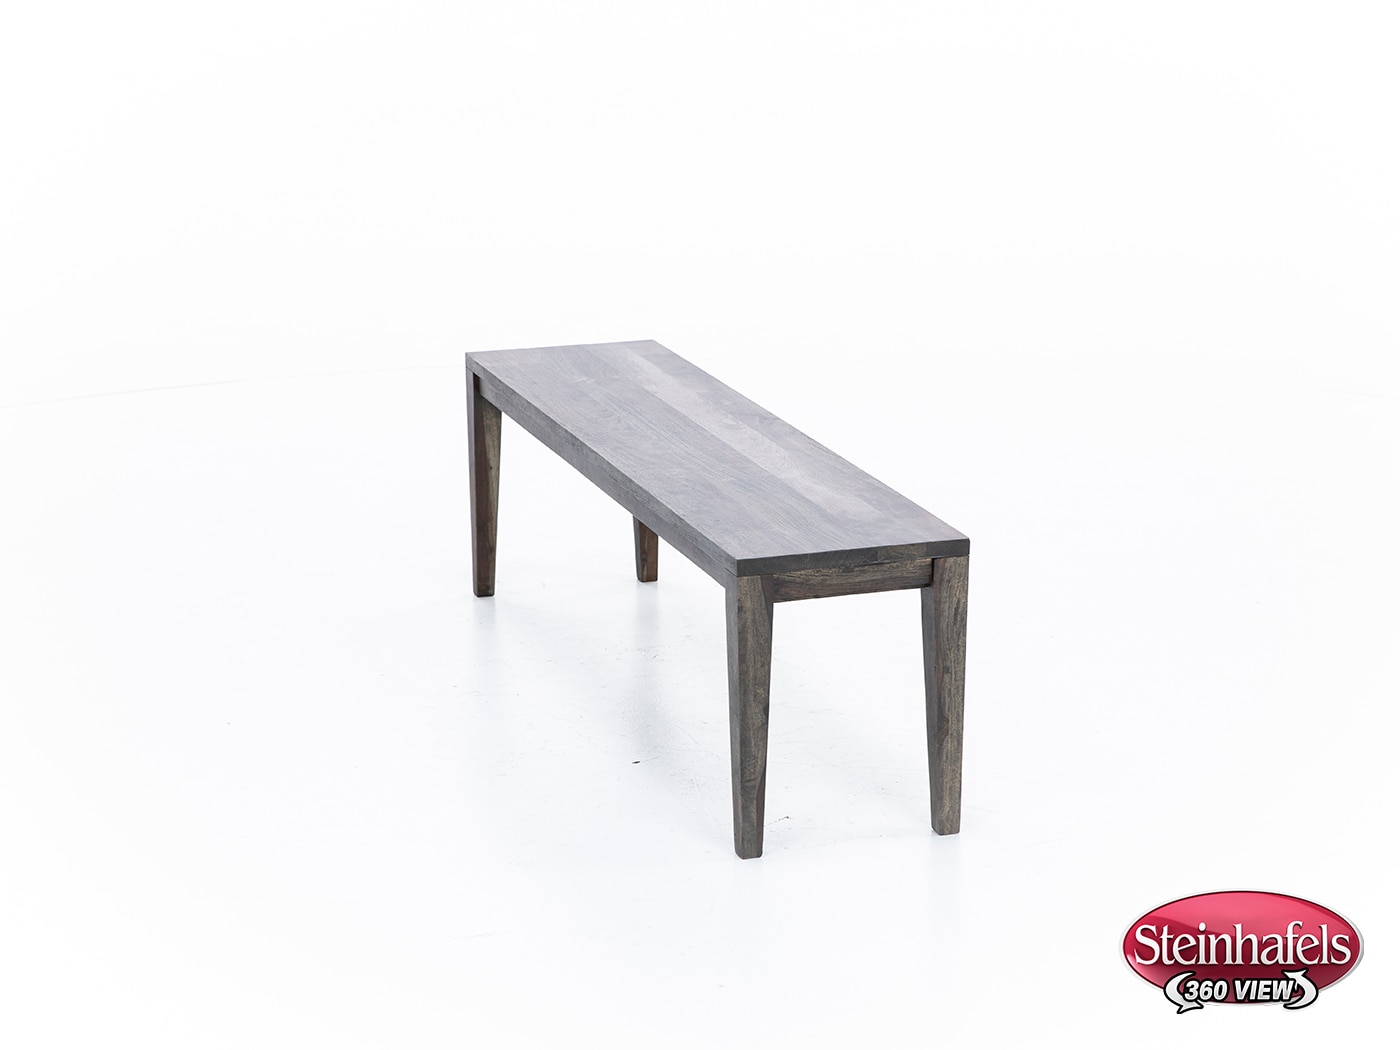 port brown inch standard seat height bench  image   